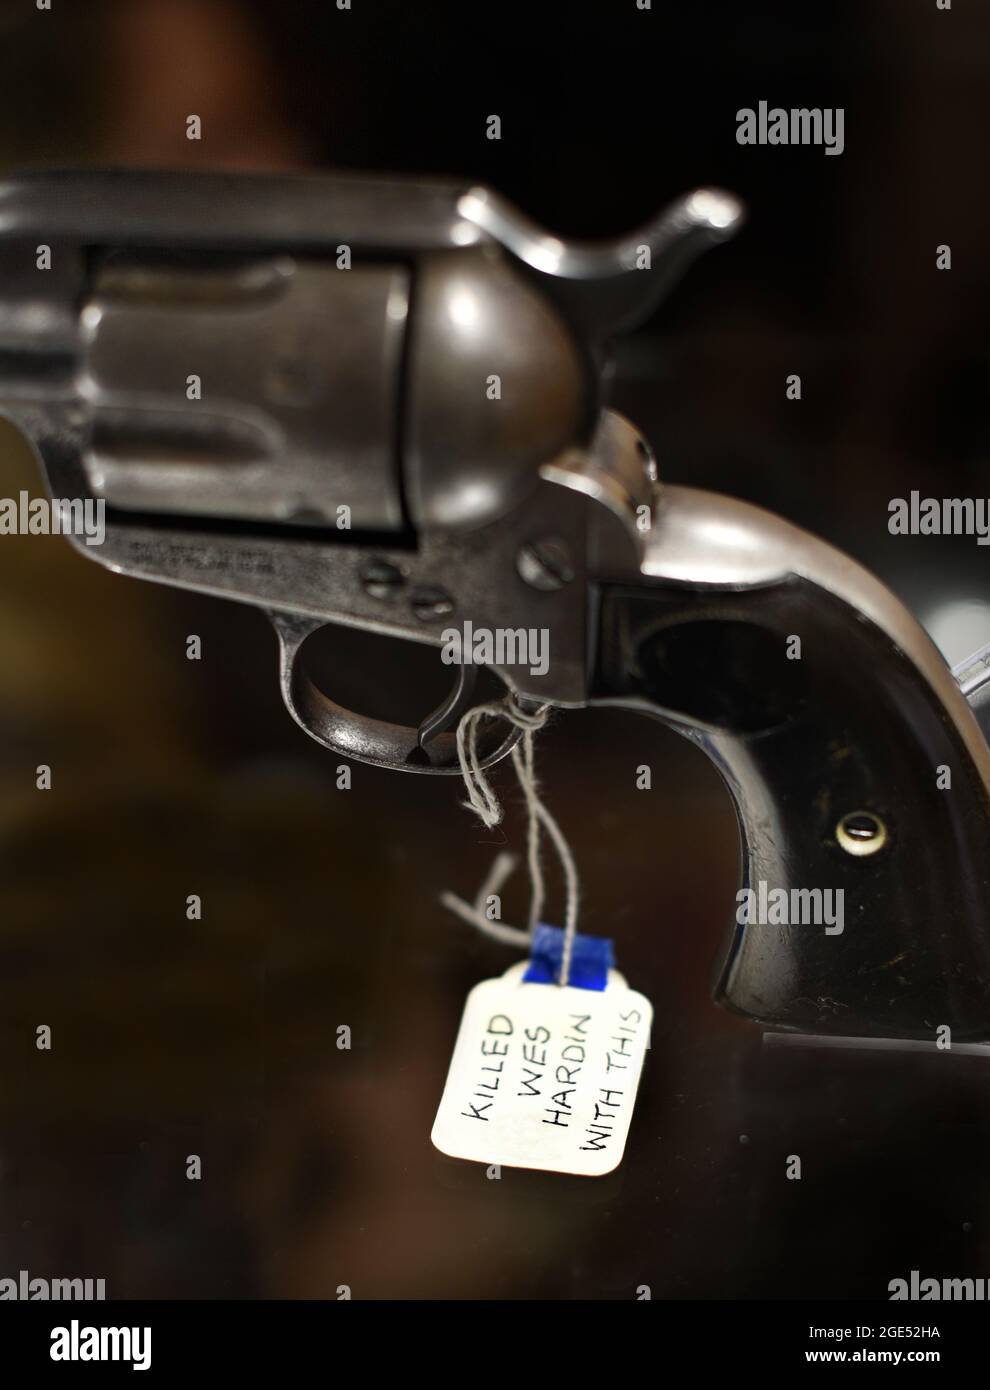 The revolver used to kill notorious Old West outlaw and gunfighter John Wesley Hardin in 1895 in El Paso, Texas, on display in Santa Fe, New Mexico. Stock Photo